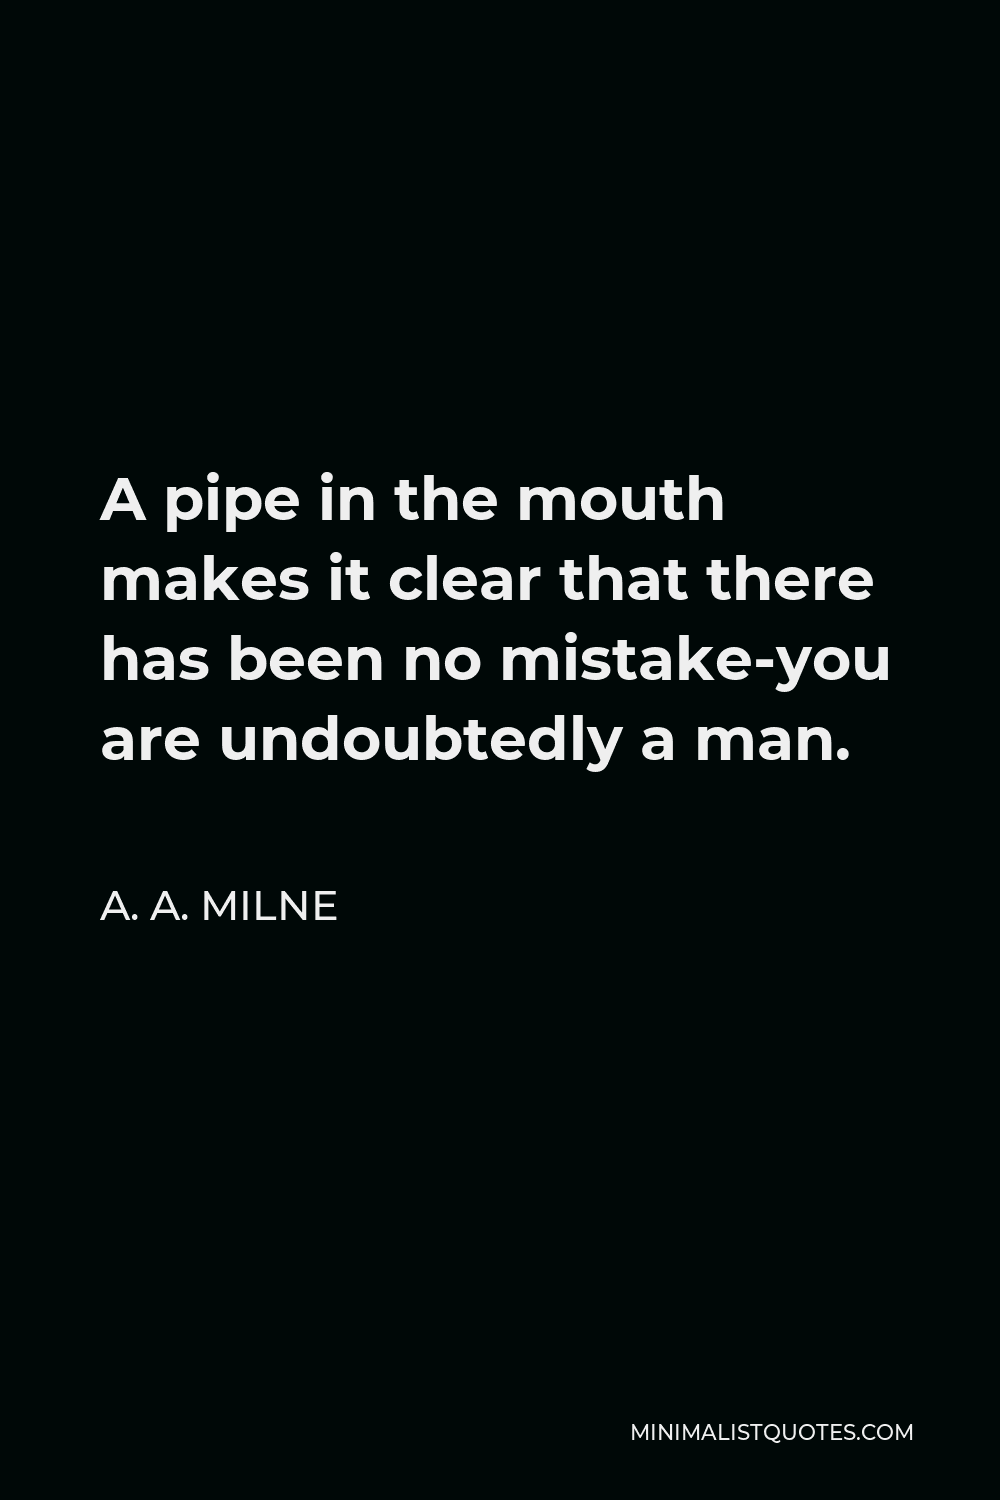 A A Milne Quote A Pipe In The Mouth Makes It Clear That There Has Been No Mistake You Are Undoubtedly A Man